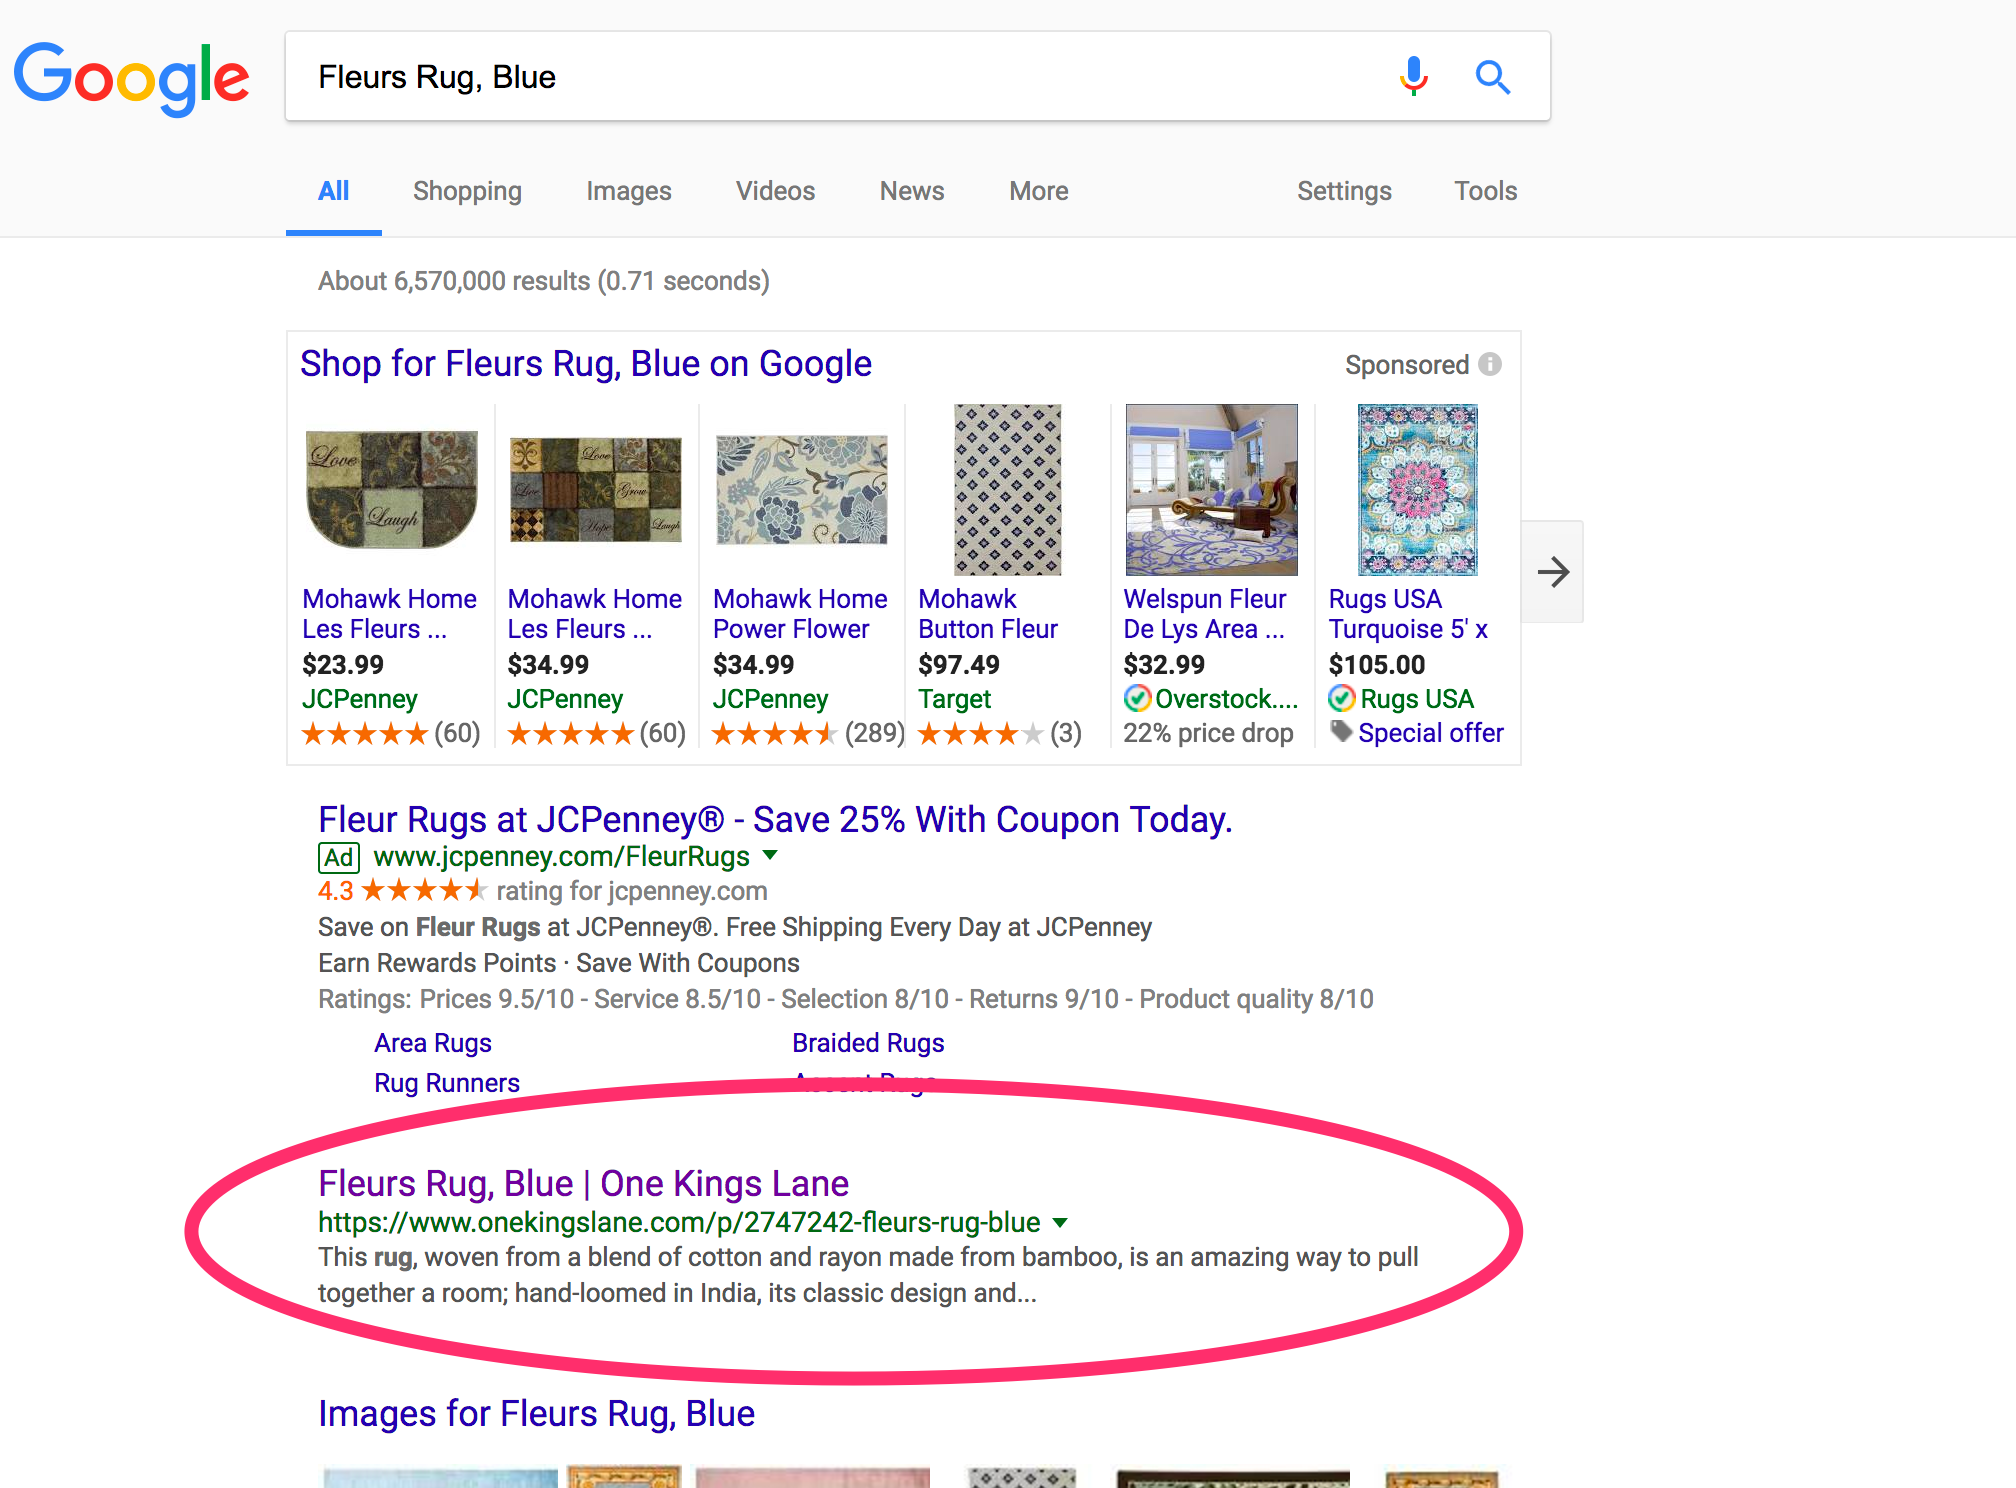 One Kings Lane has a top rank on Google for "Fleurs Rug, Blue" despite not having canonical tags.